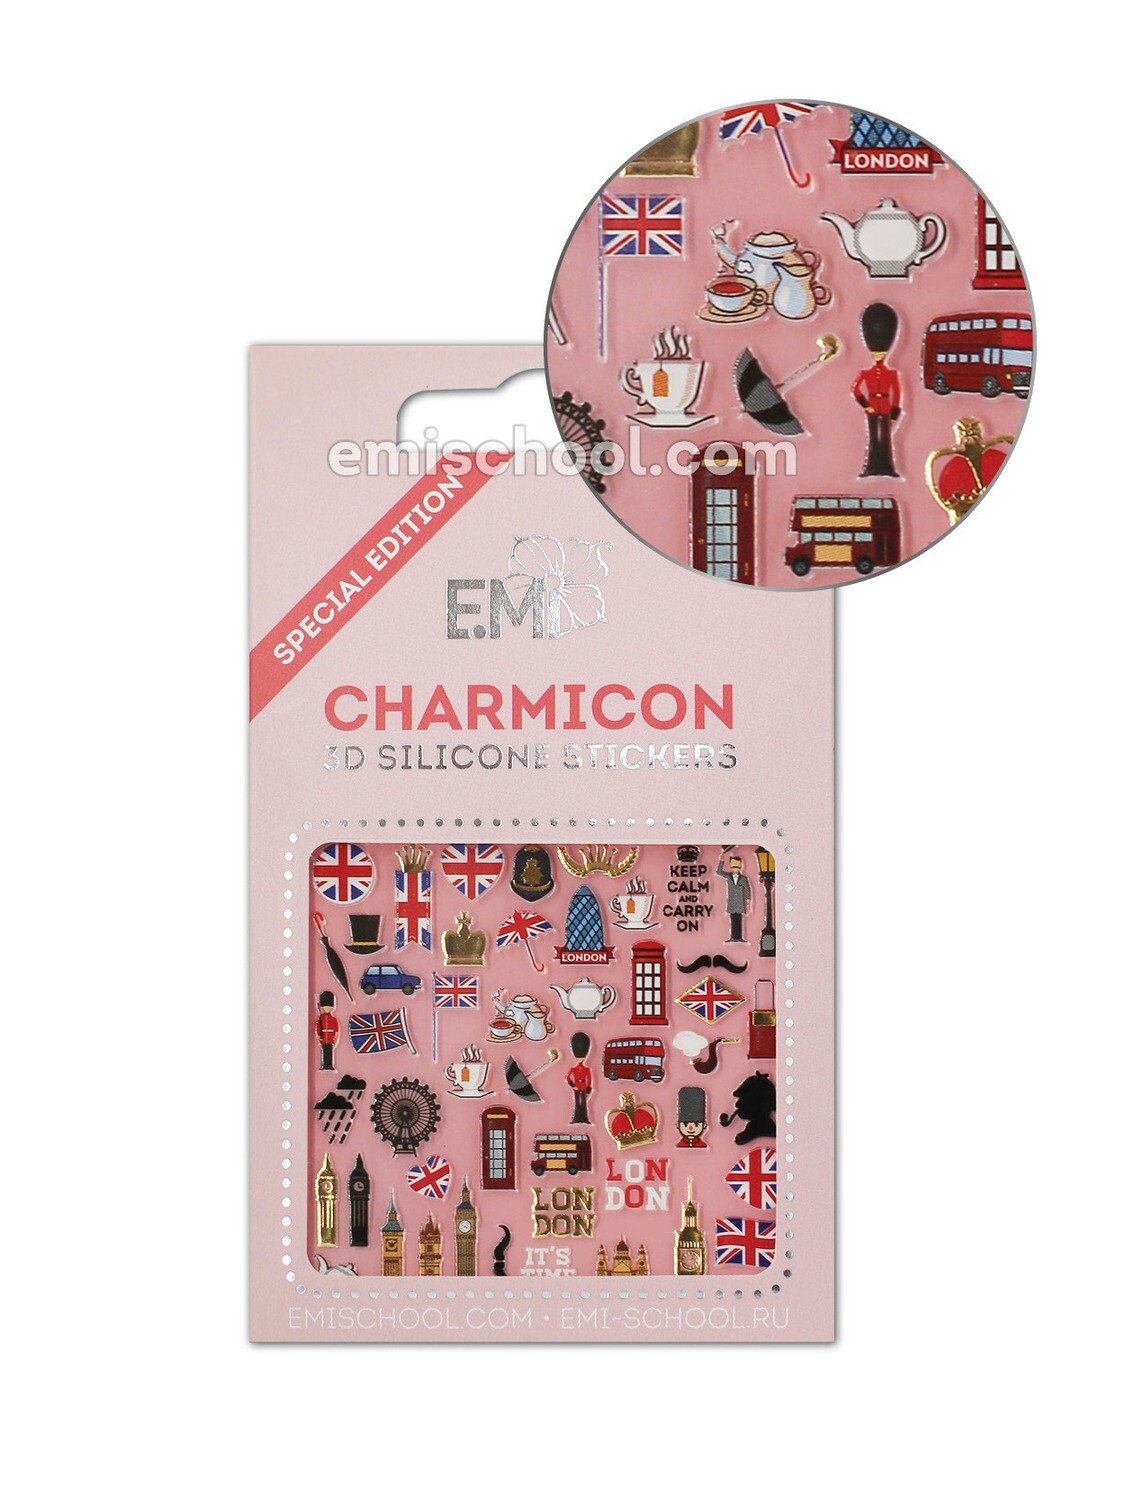 Charmicon 3D Silicone Stickers England